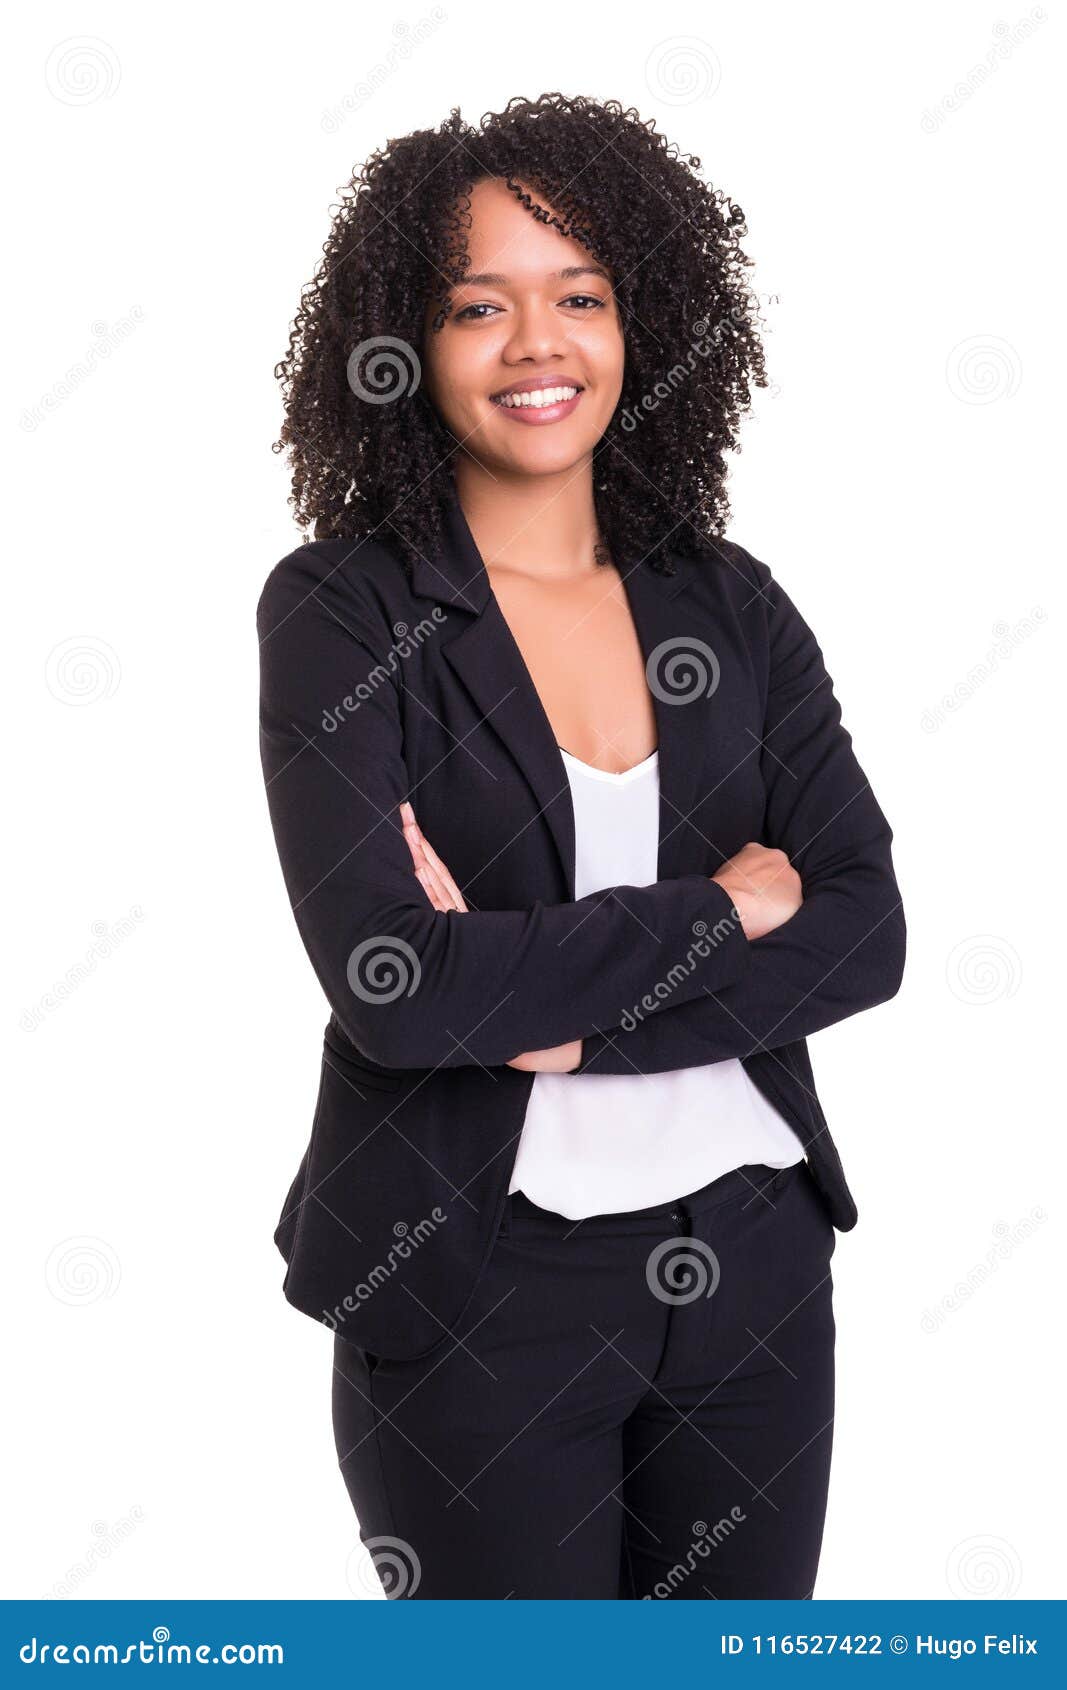 African business woman stock photo. Image of corporate - 116527422